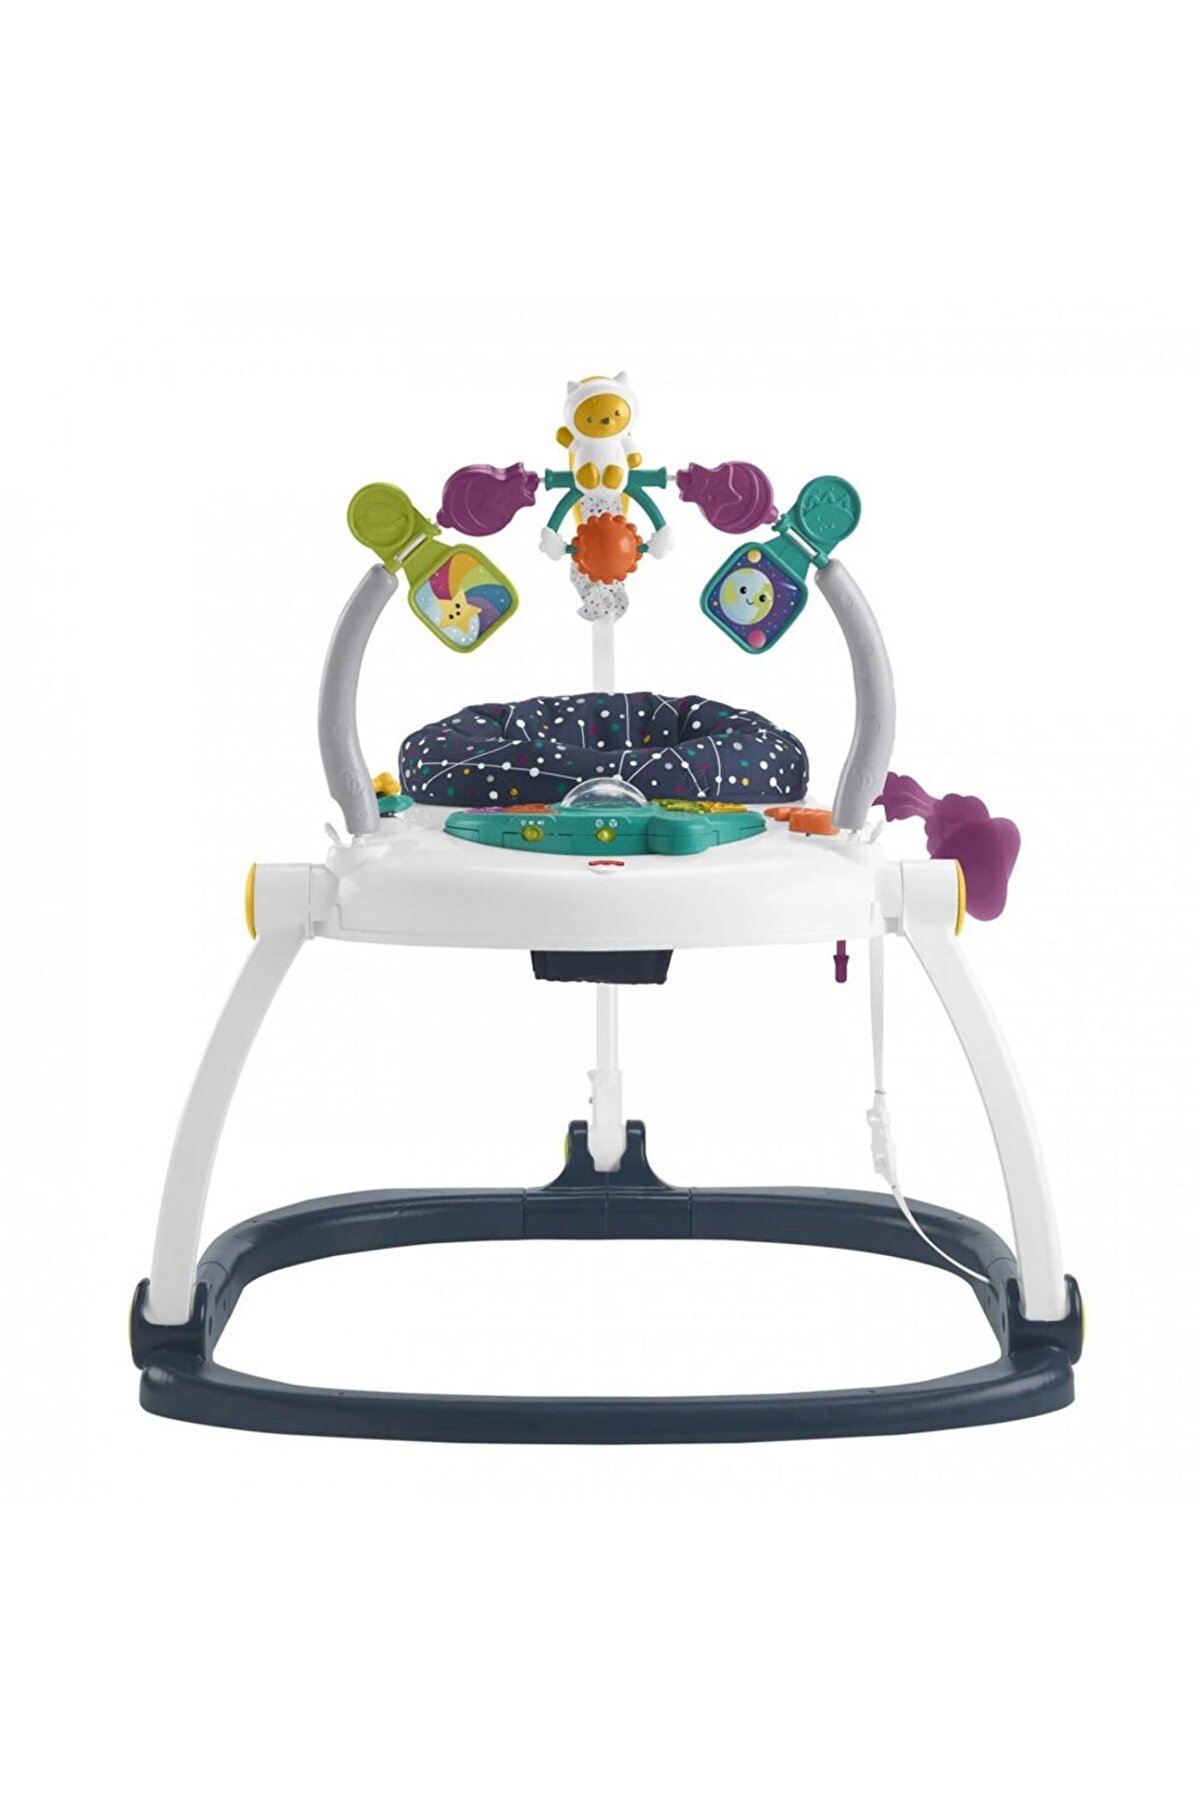 Fisher Price Astro Kitty Spacesaver Jumperoo Hbg73